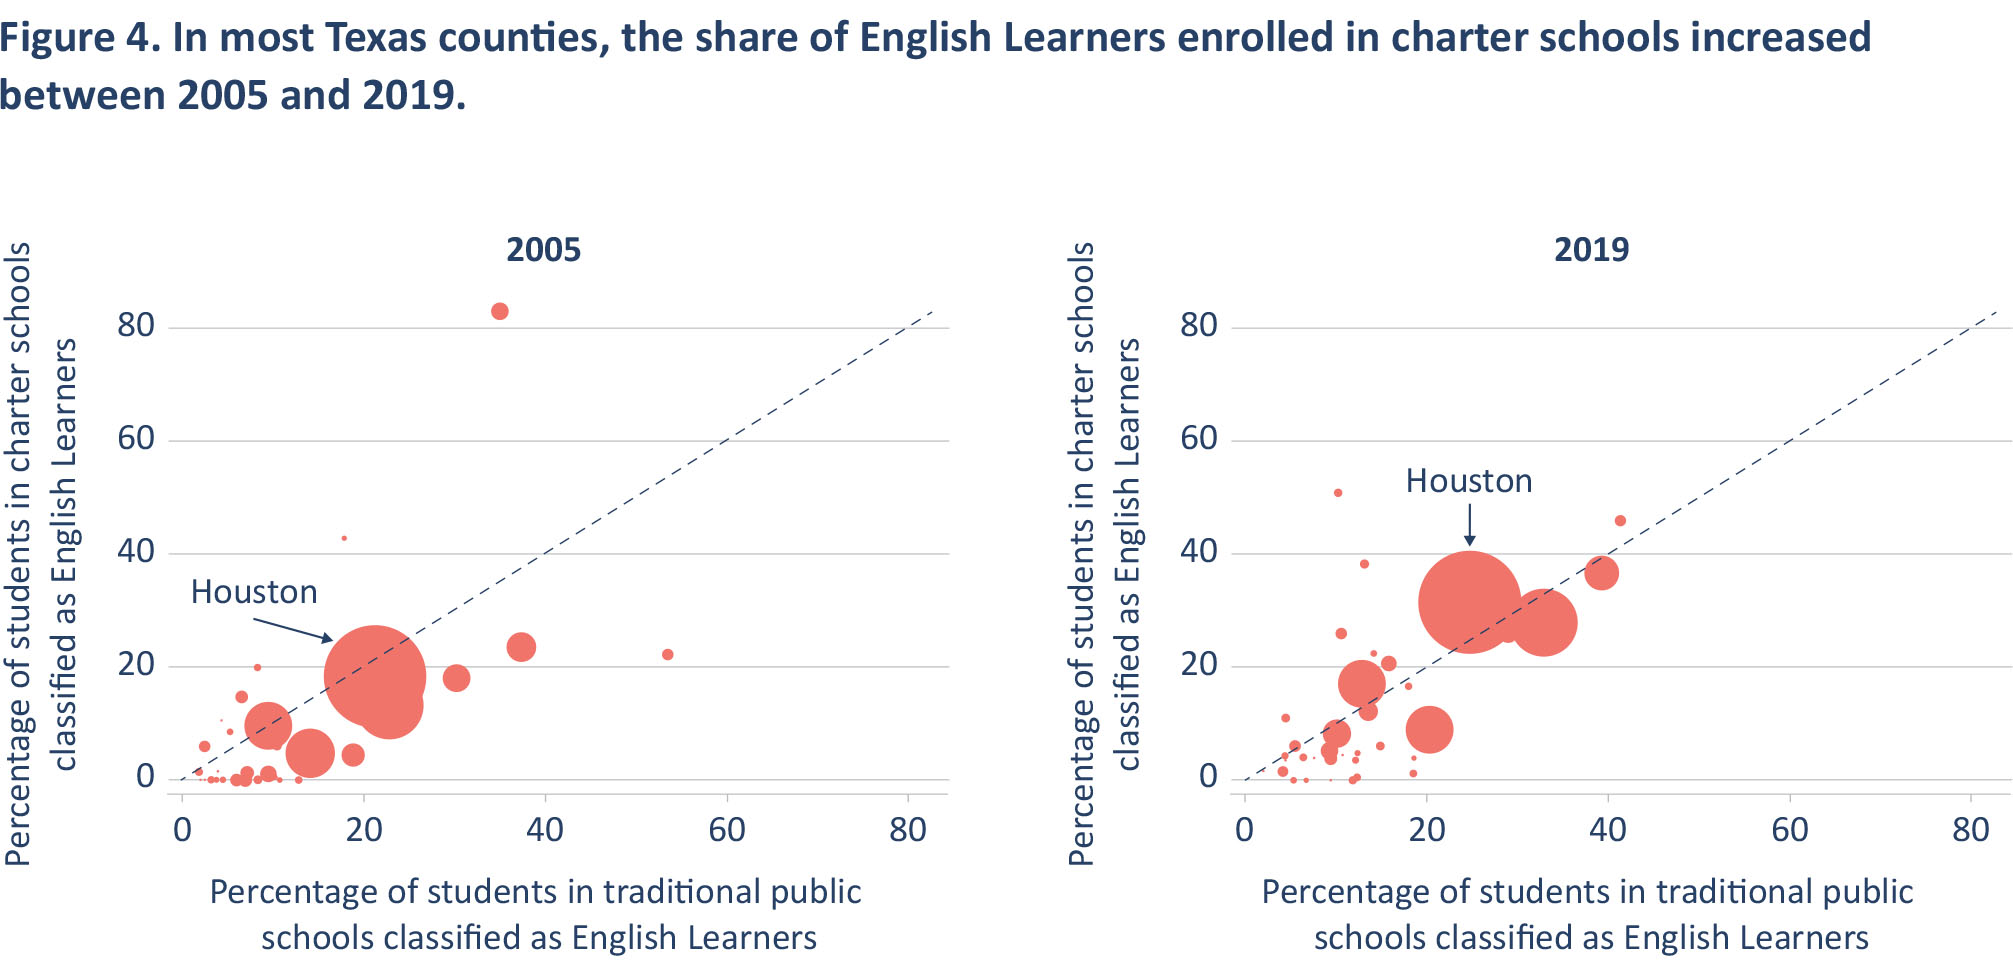 Figure 4. In most Texas counties, the share of English Learners enrolled in charter schools increased between 2005 and 2019.